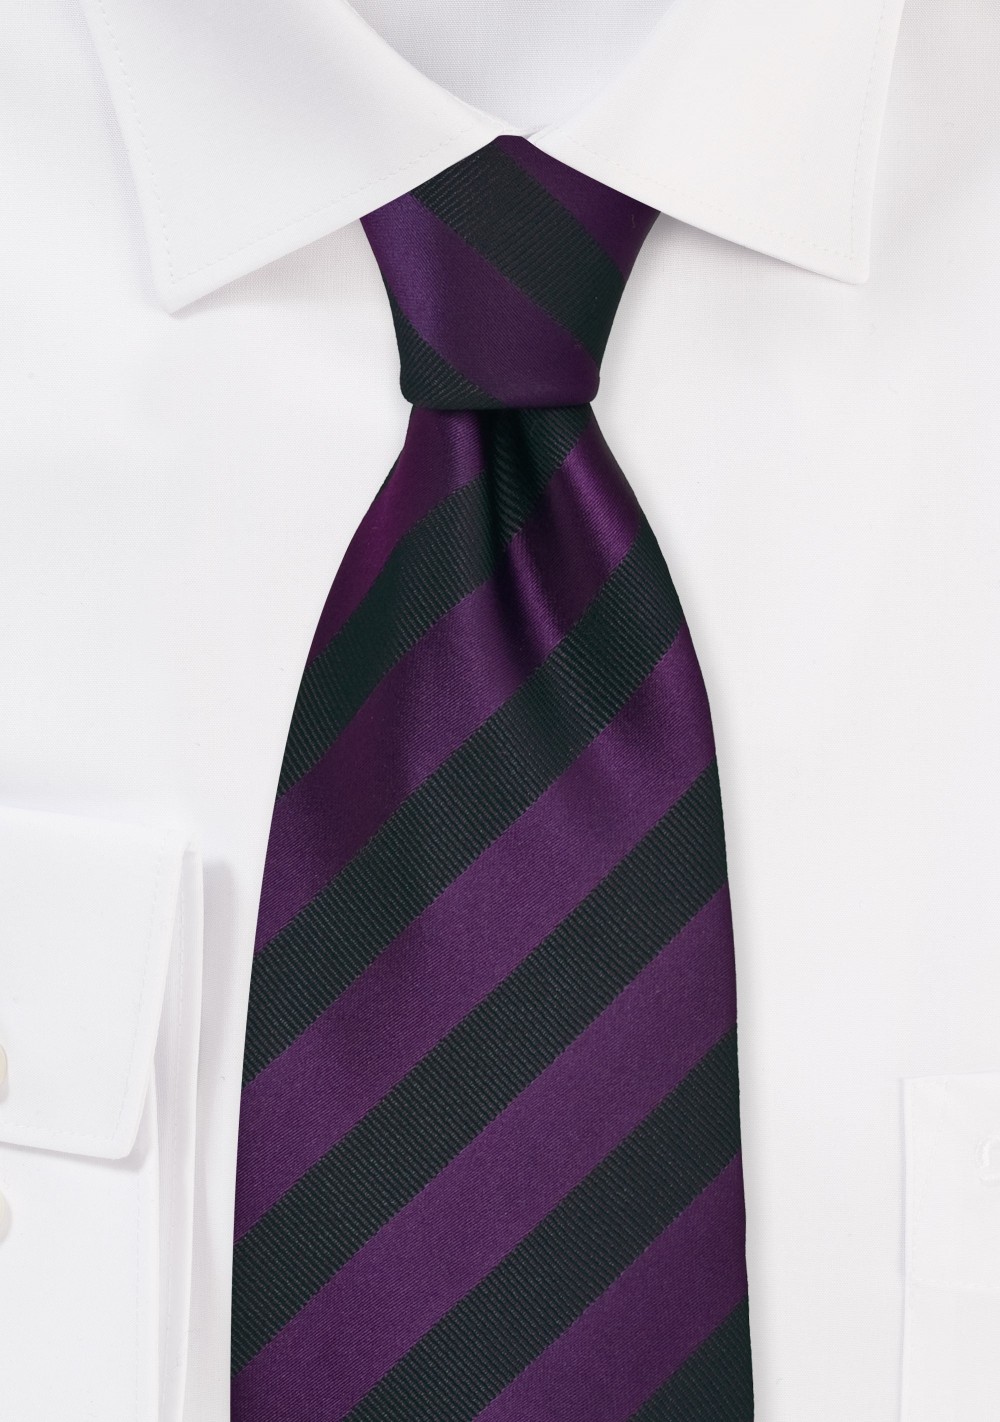 Black and Purple Striped Tie in Long Length